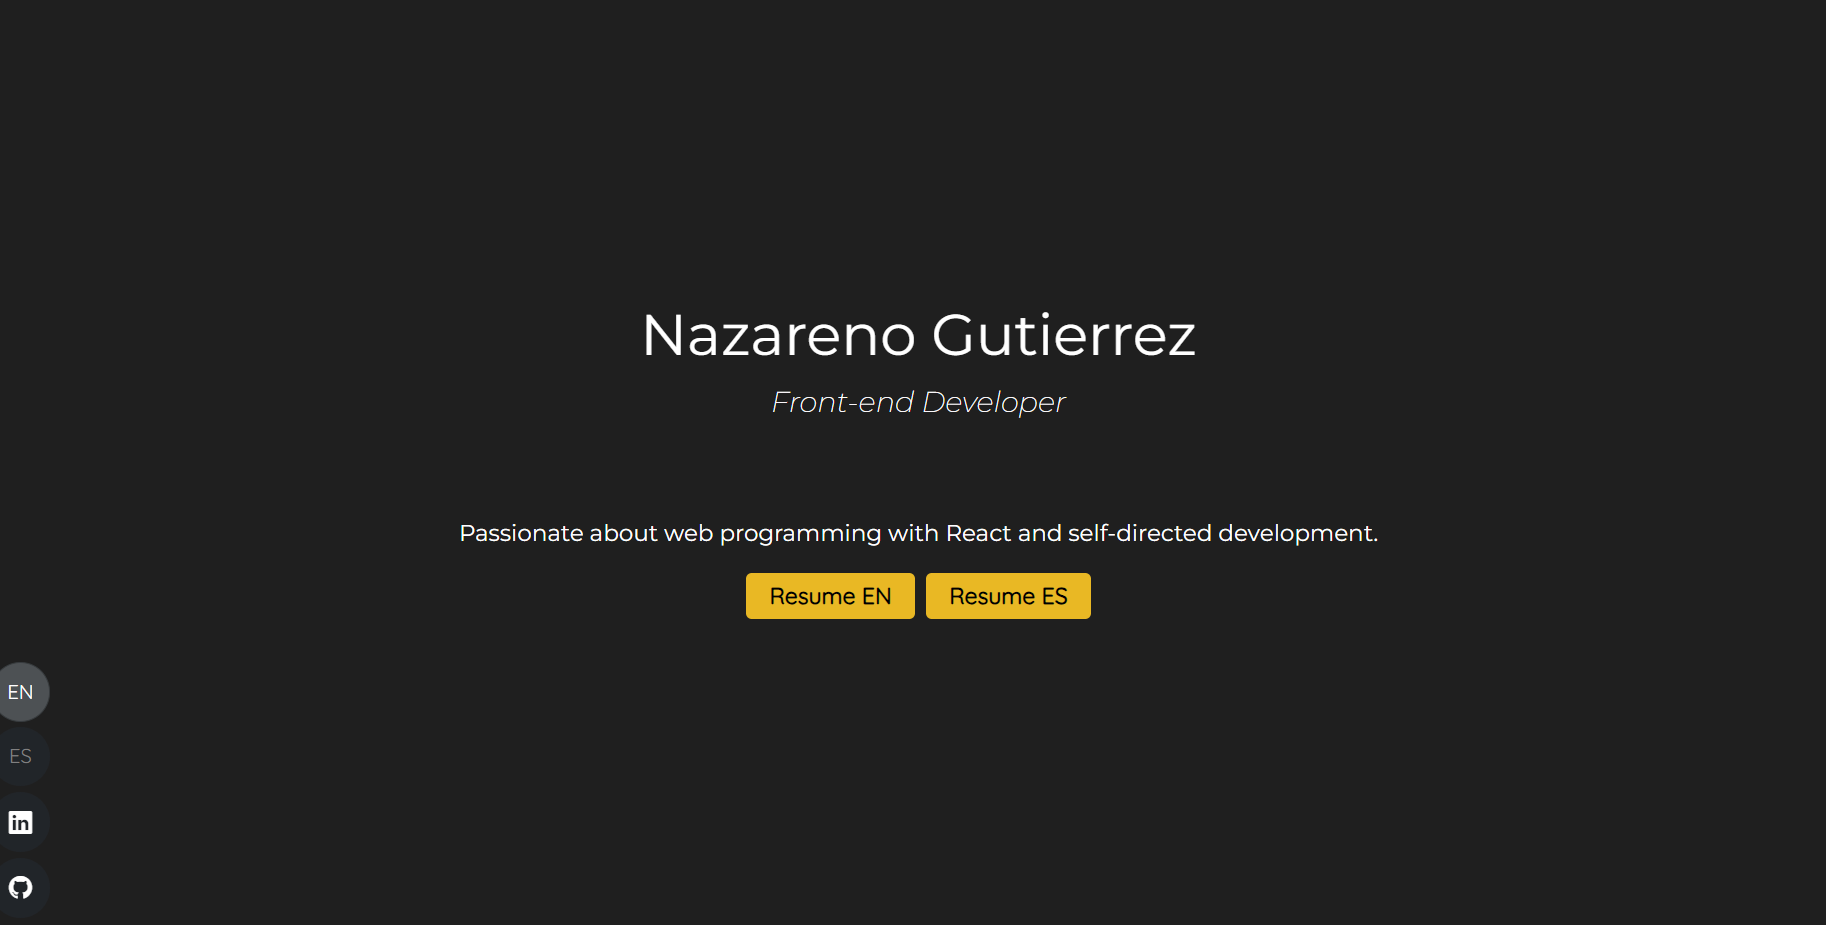 Nazareno Gutierrez

front end Developer

Passionate about web programming with React and self-directed development.